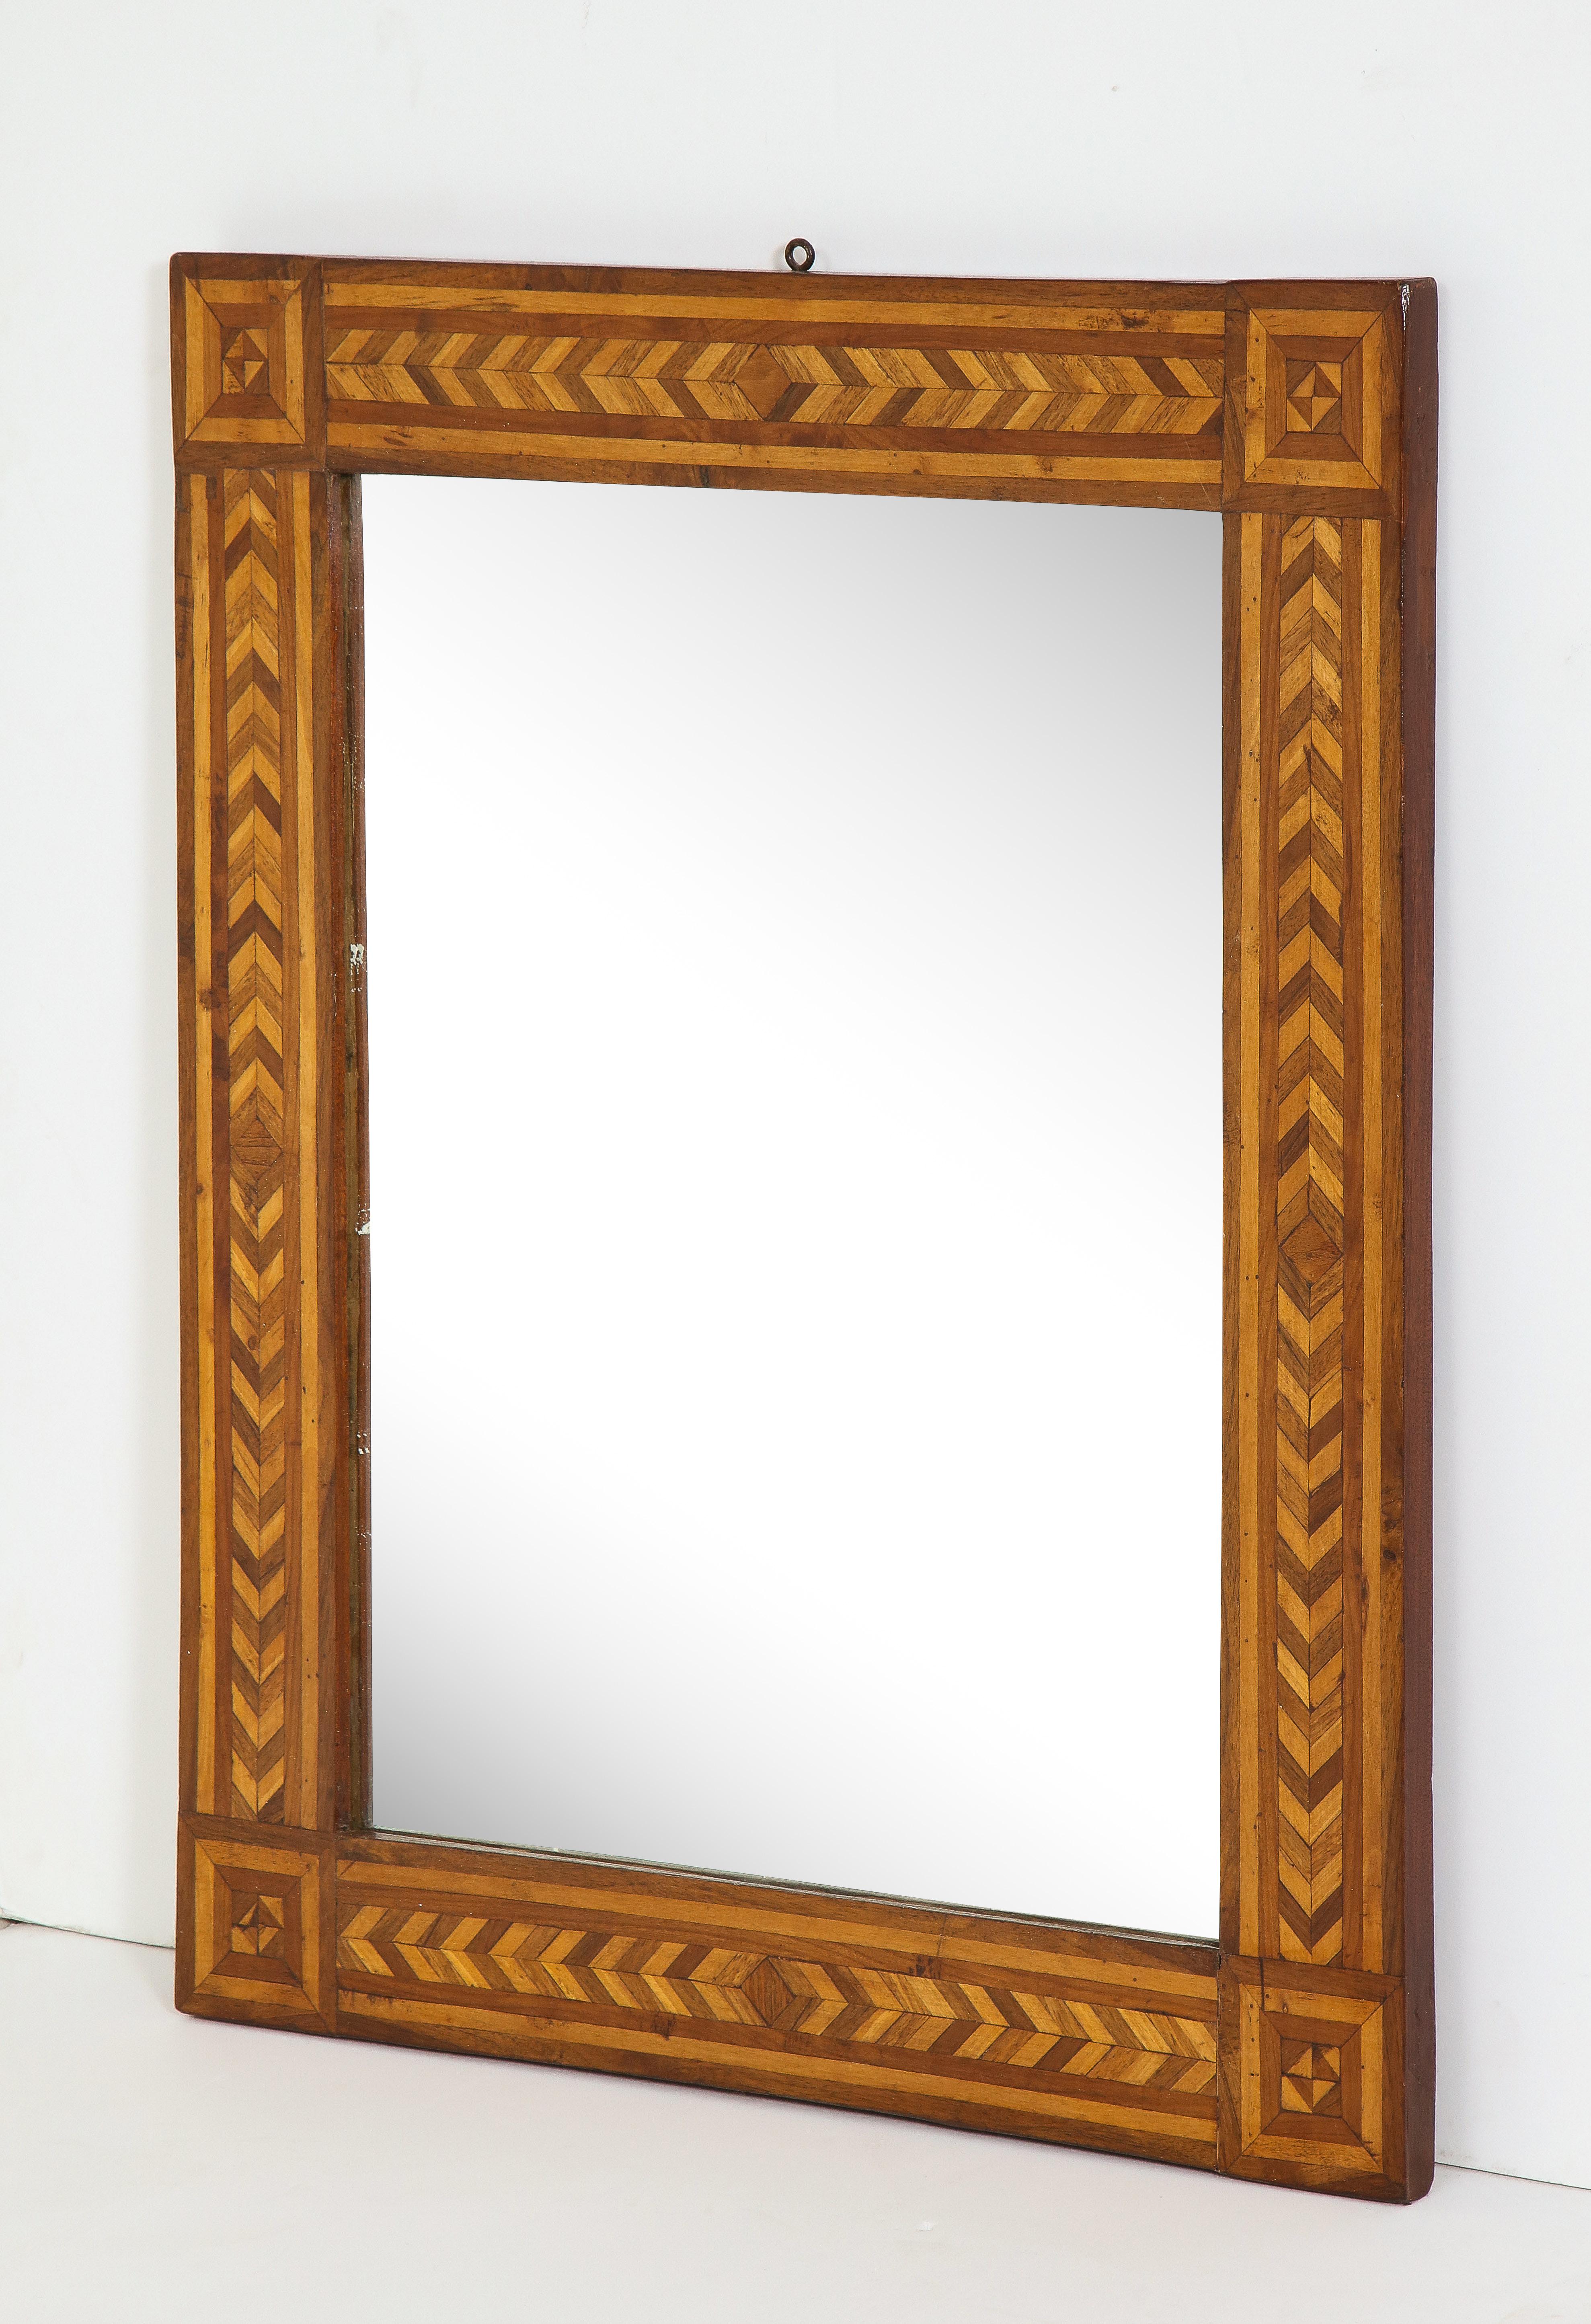 19th century German high rectangular, inlaid geometric parquetry wall mirror made of walnut and other hardwoods. Hanging loop visible at top.